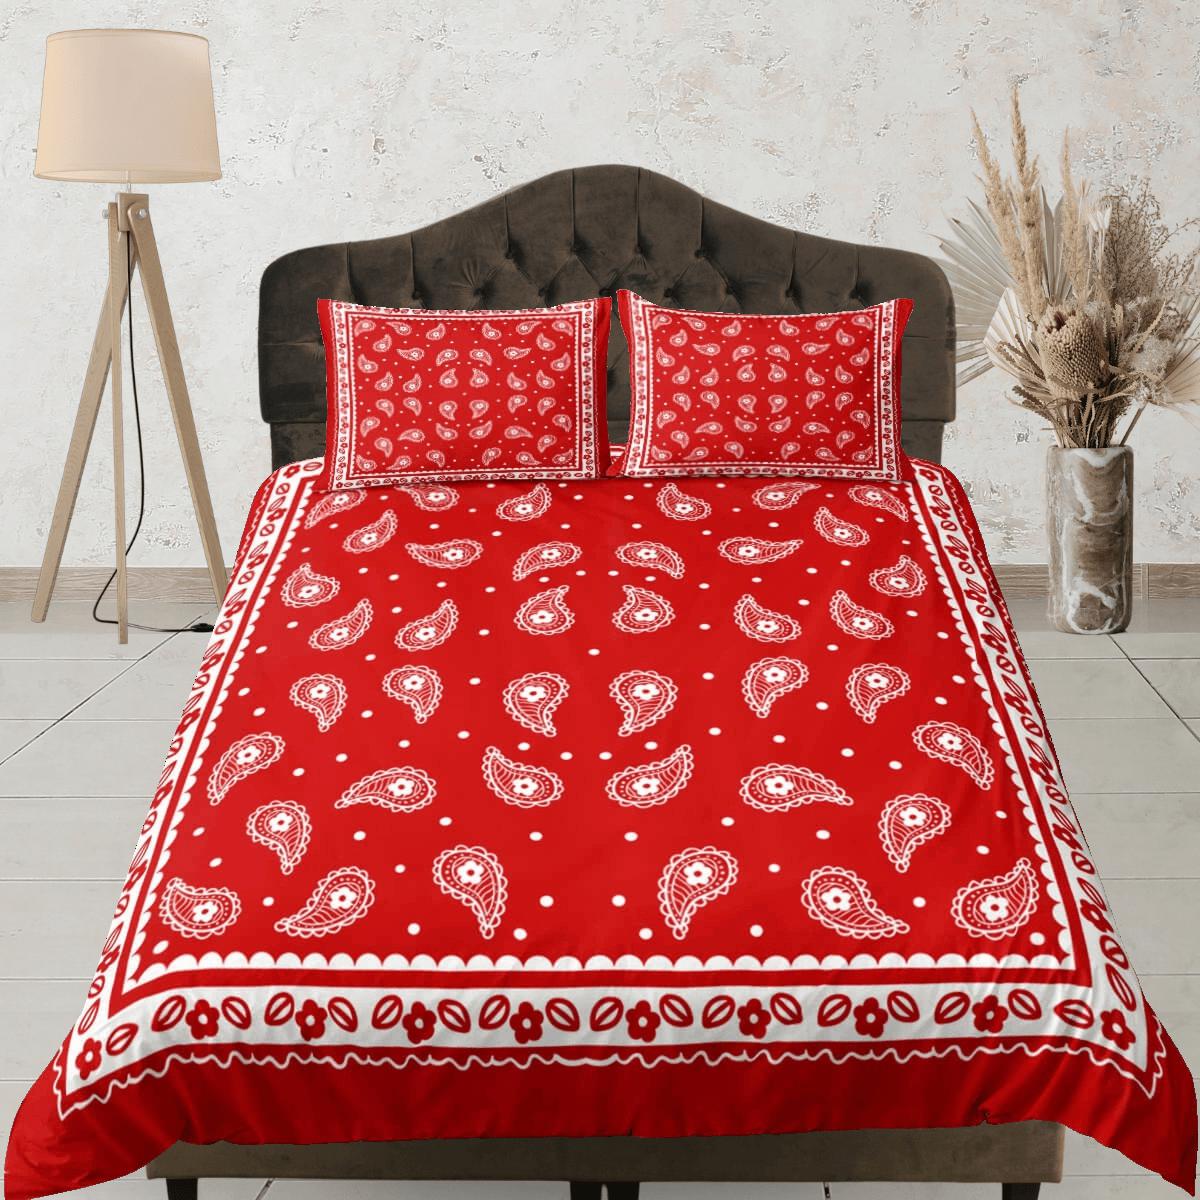 daintyduvet Red bandana paisley duvet cover set, aesthetic room decor bedding set full, king, queen size, abstract boho bedspread, luxury bed cover